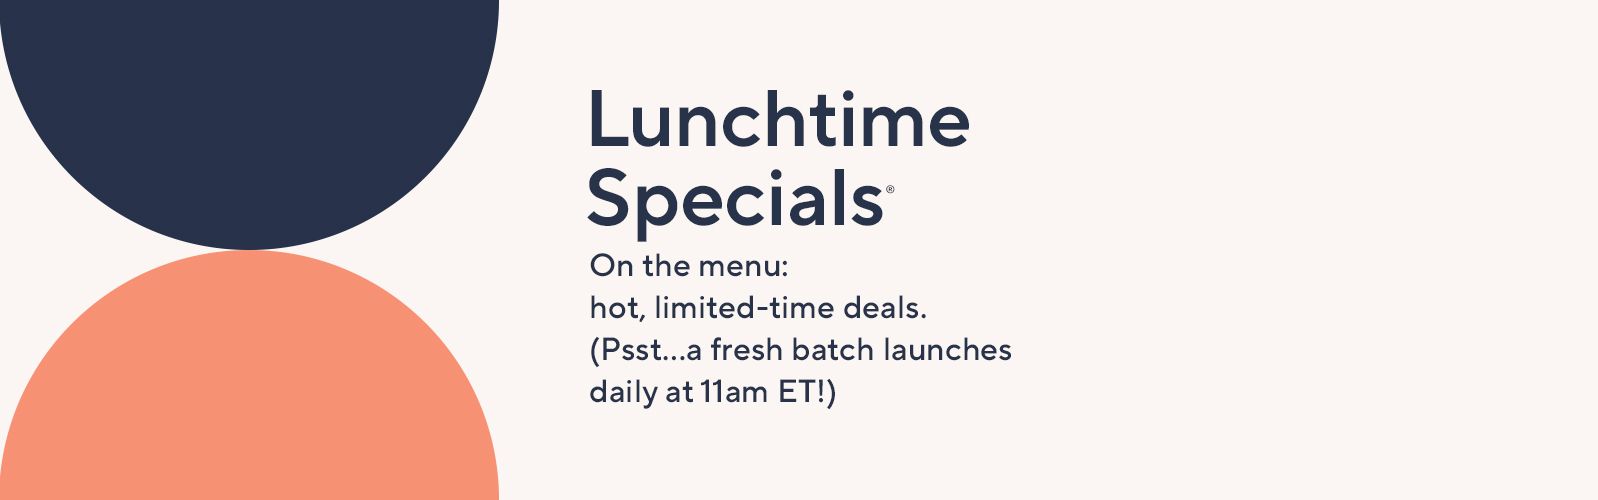 Lunchtime Specials: On the menu: hot, limited-time deals. (Psst…a fresh batch launches daily at 11am ET!)